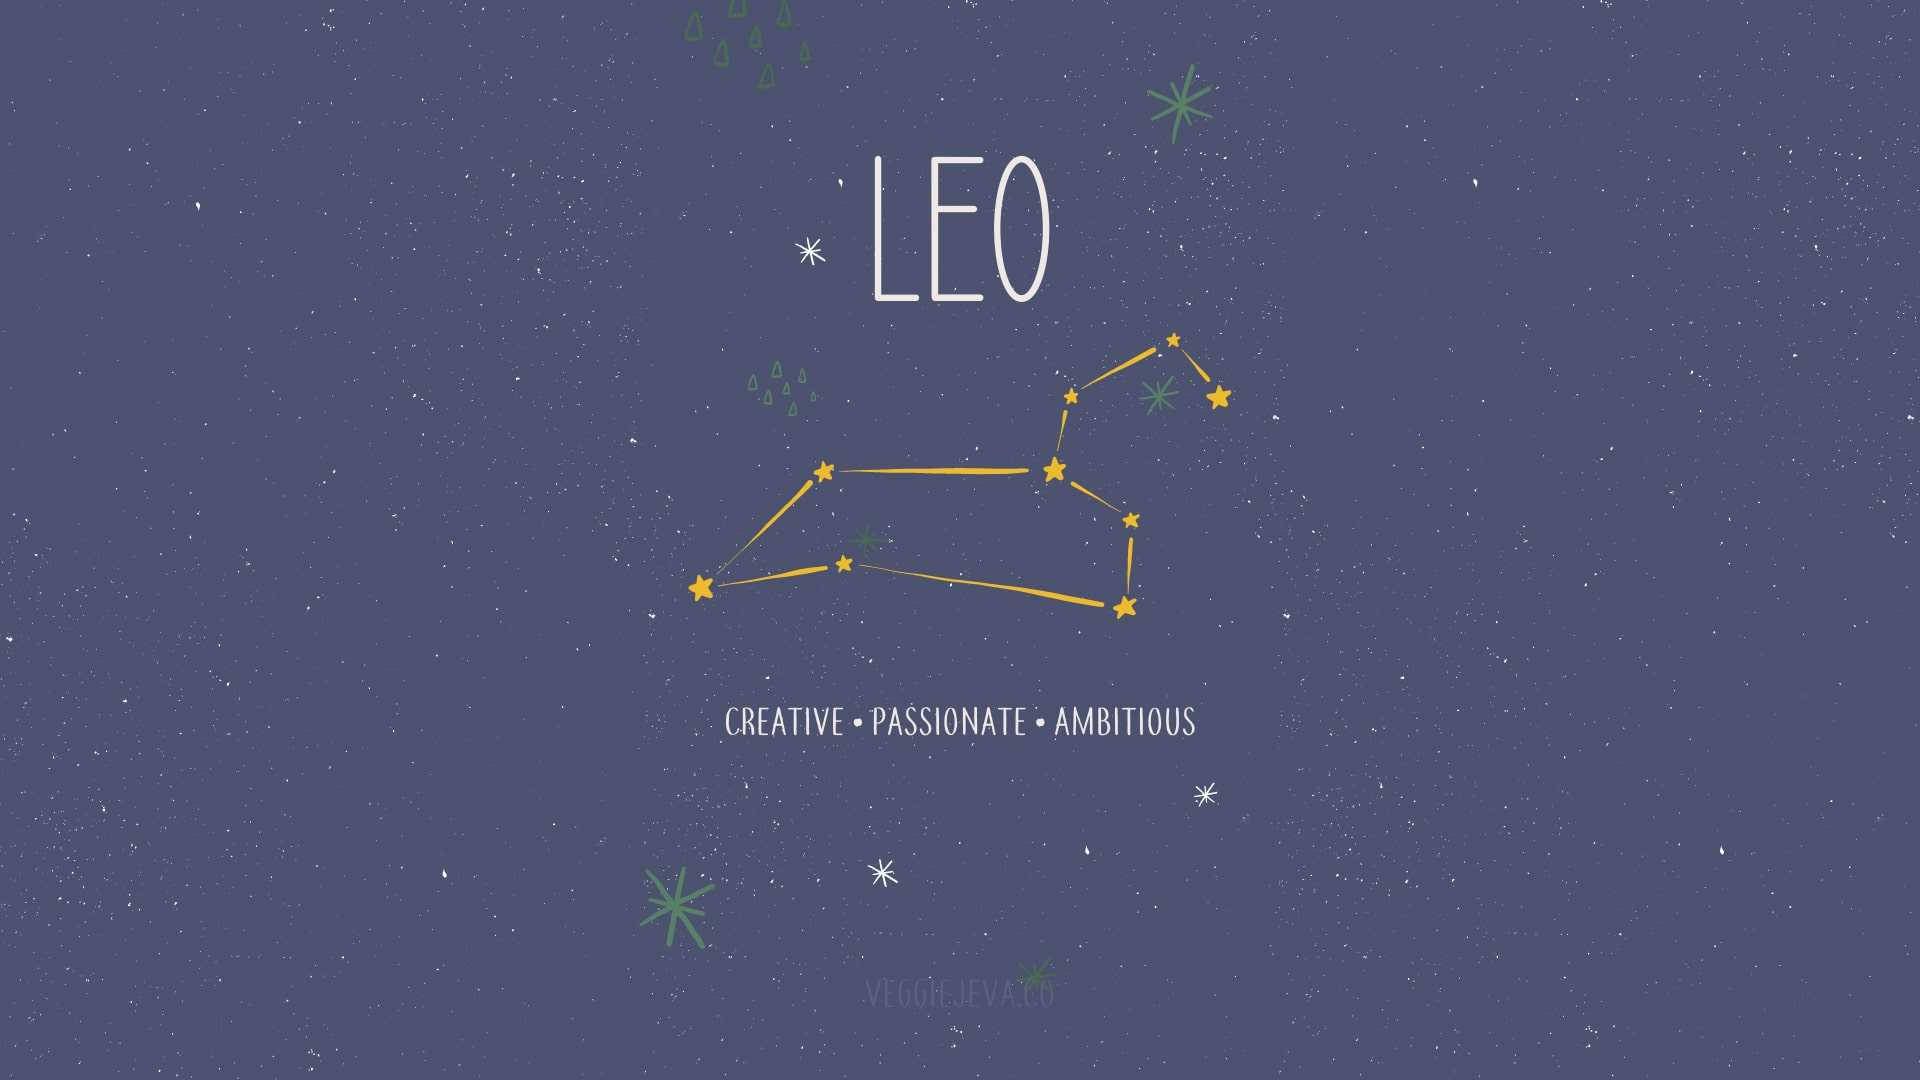 Download Leo Constellation And Qualities Wallpaper